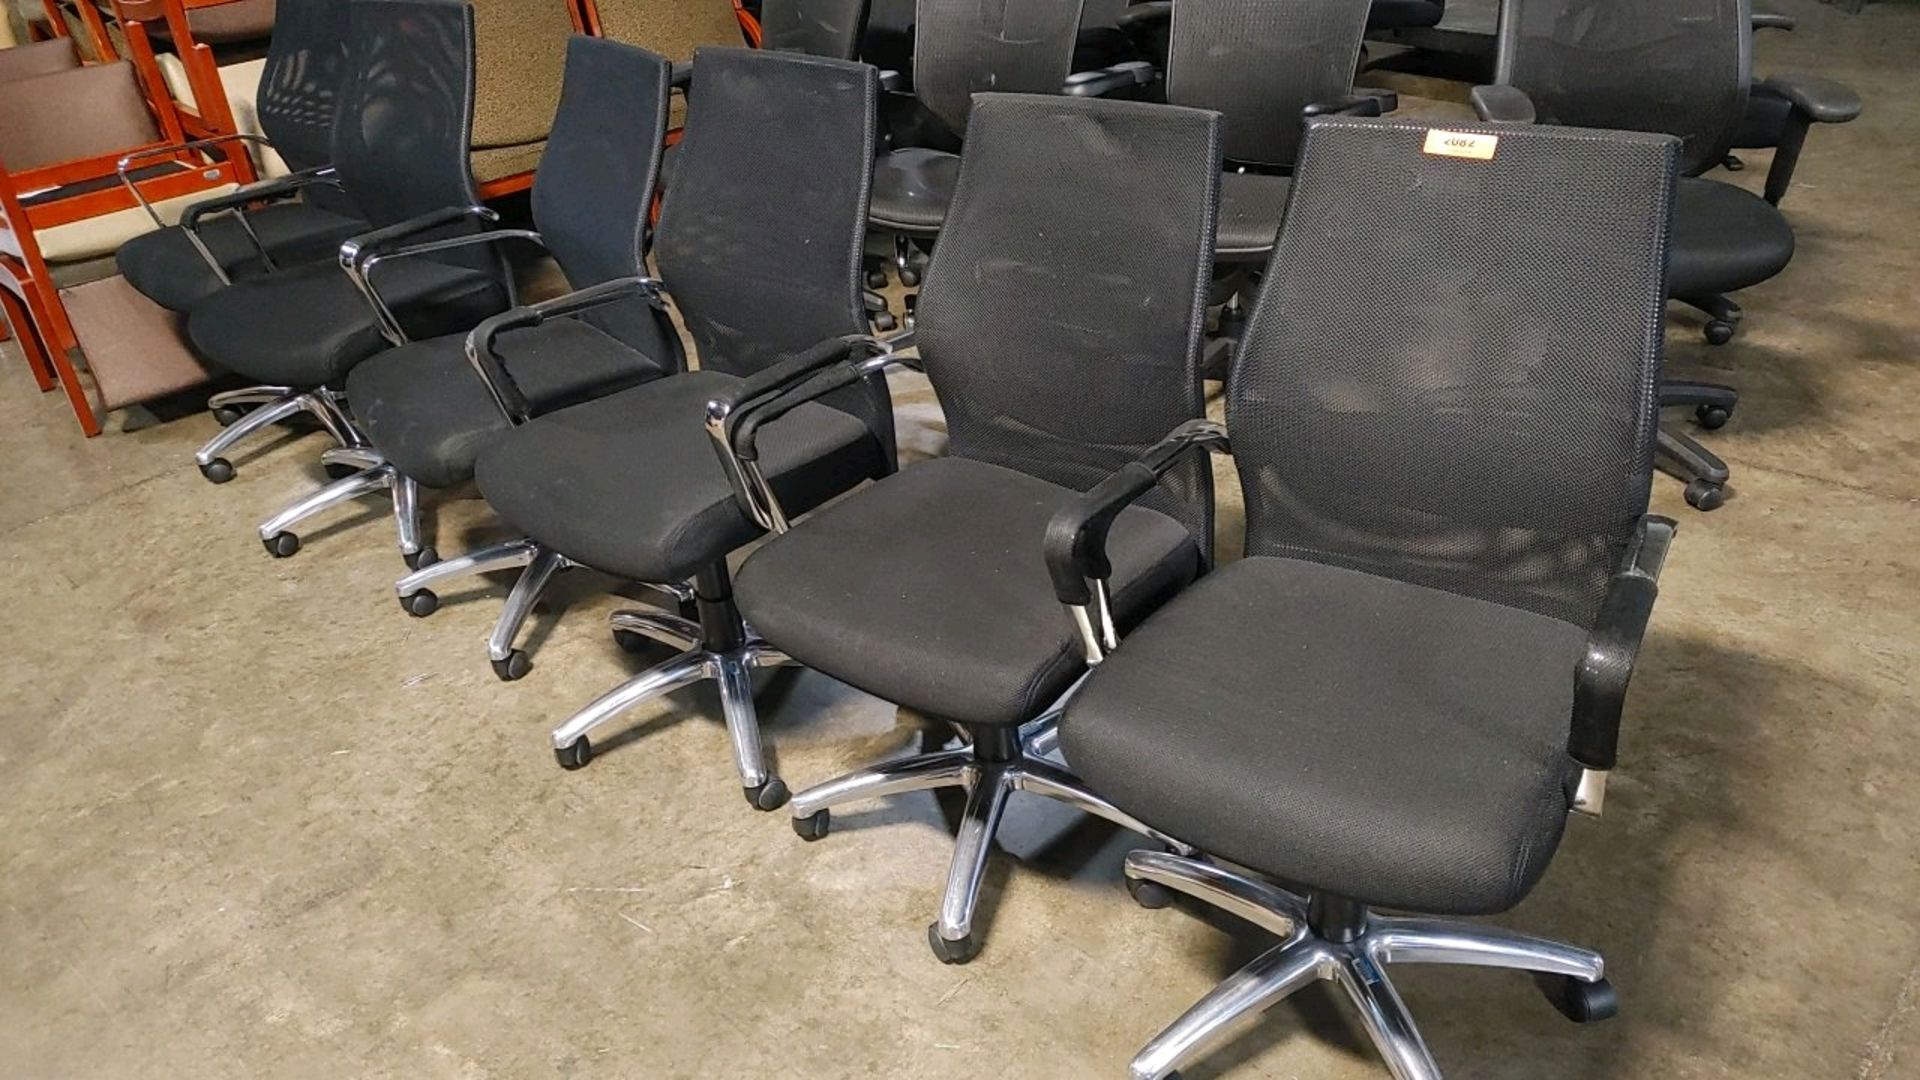 VARIOUS TASK OFFICE CHAIRS ON WHEELS QTY: 6, LOCATED: 3821 N. FRATNEY STREET MILWAUKEE, WI 53212 - Image 2 of 2